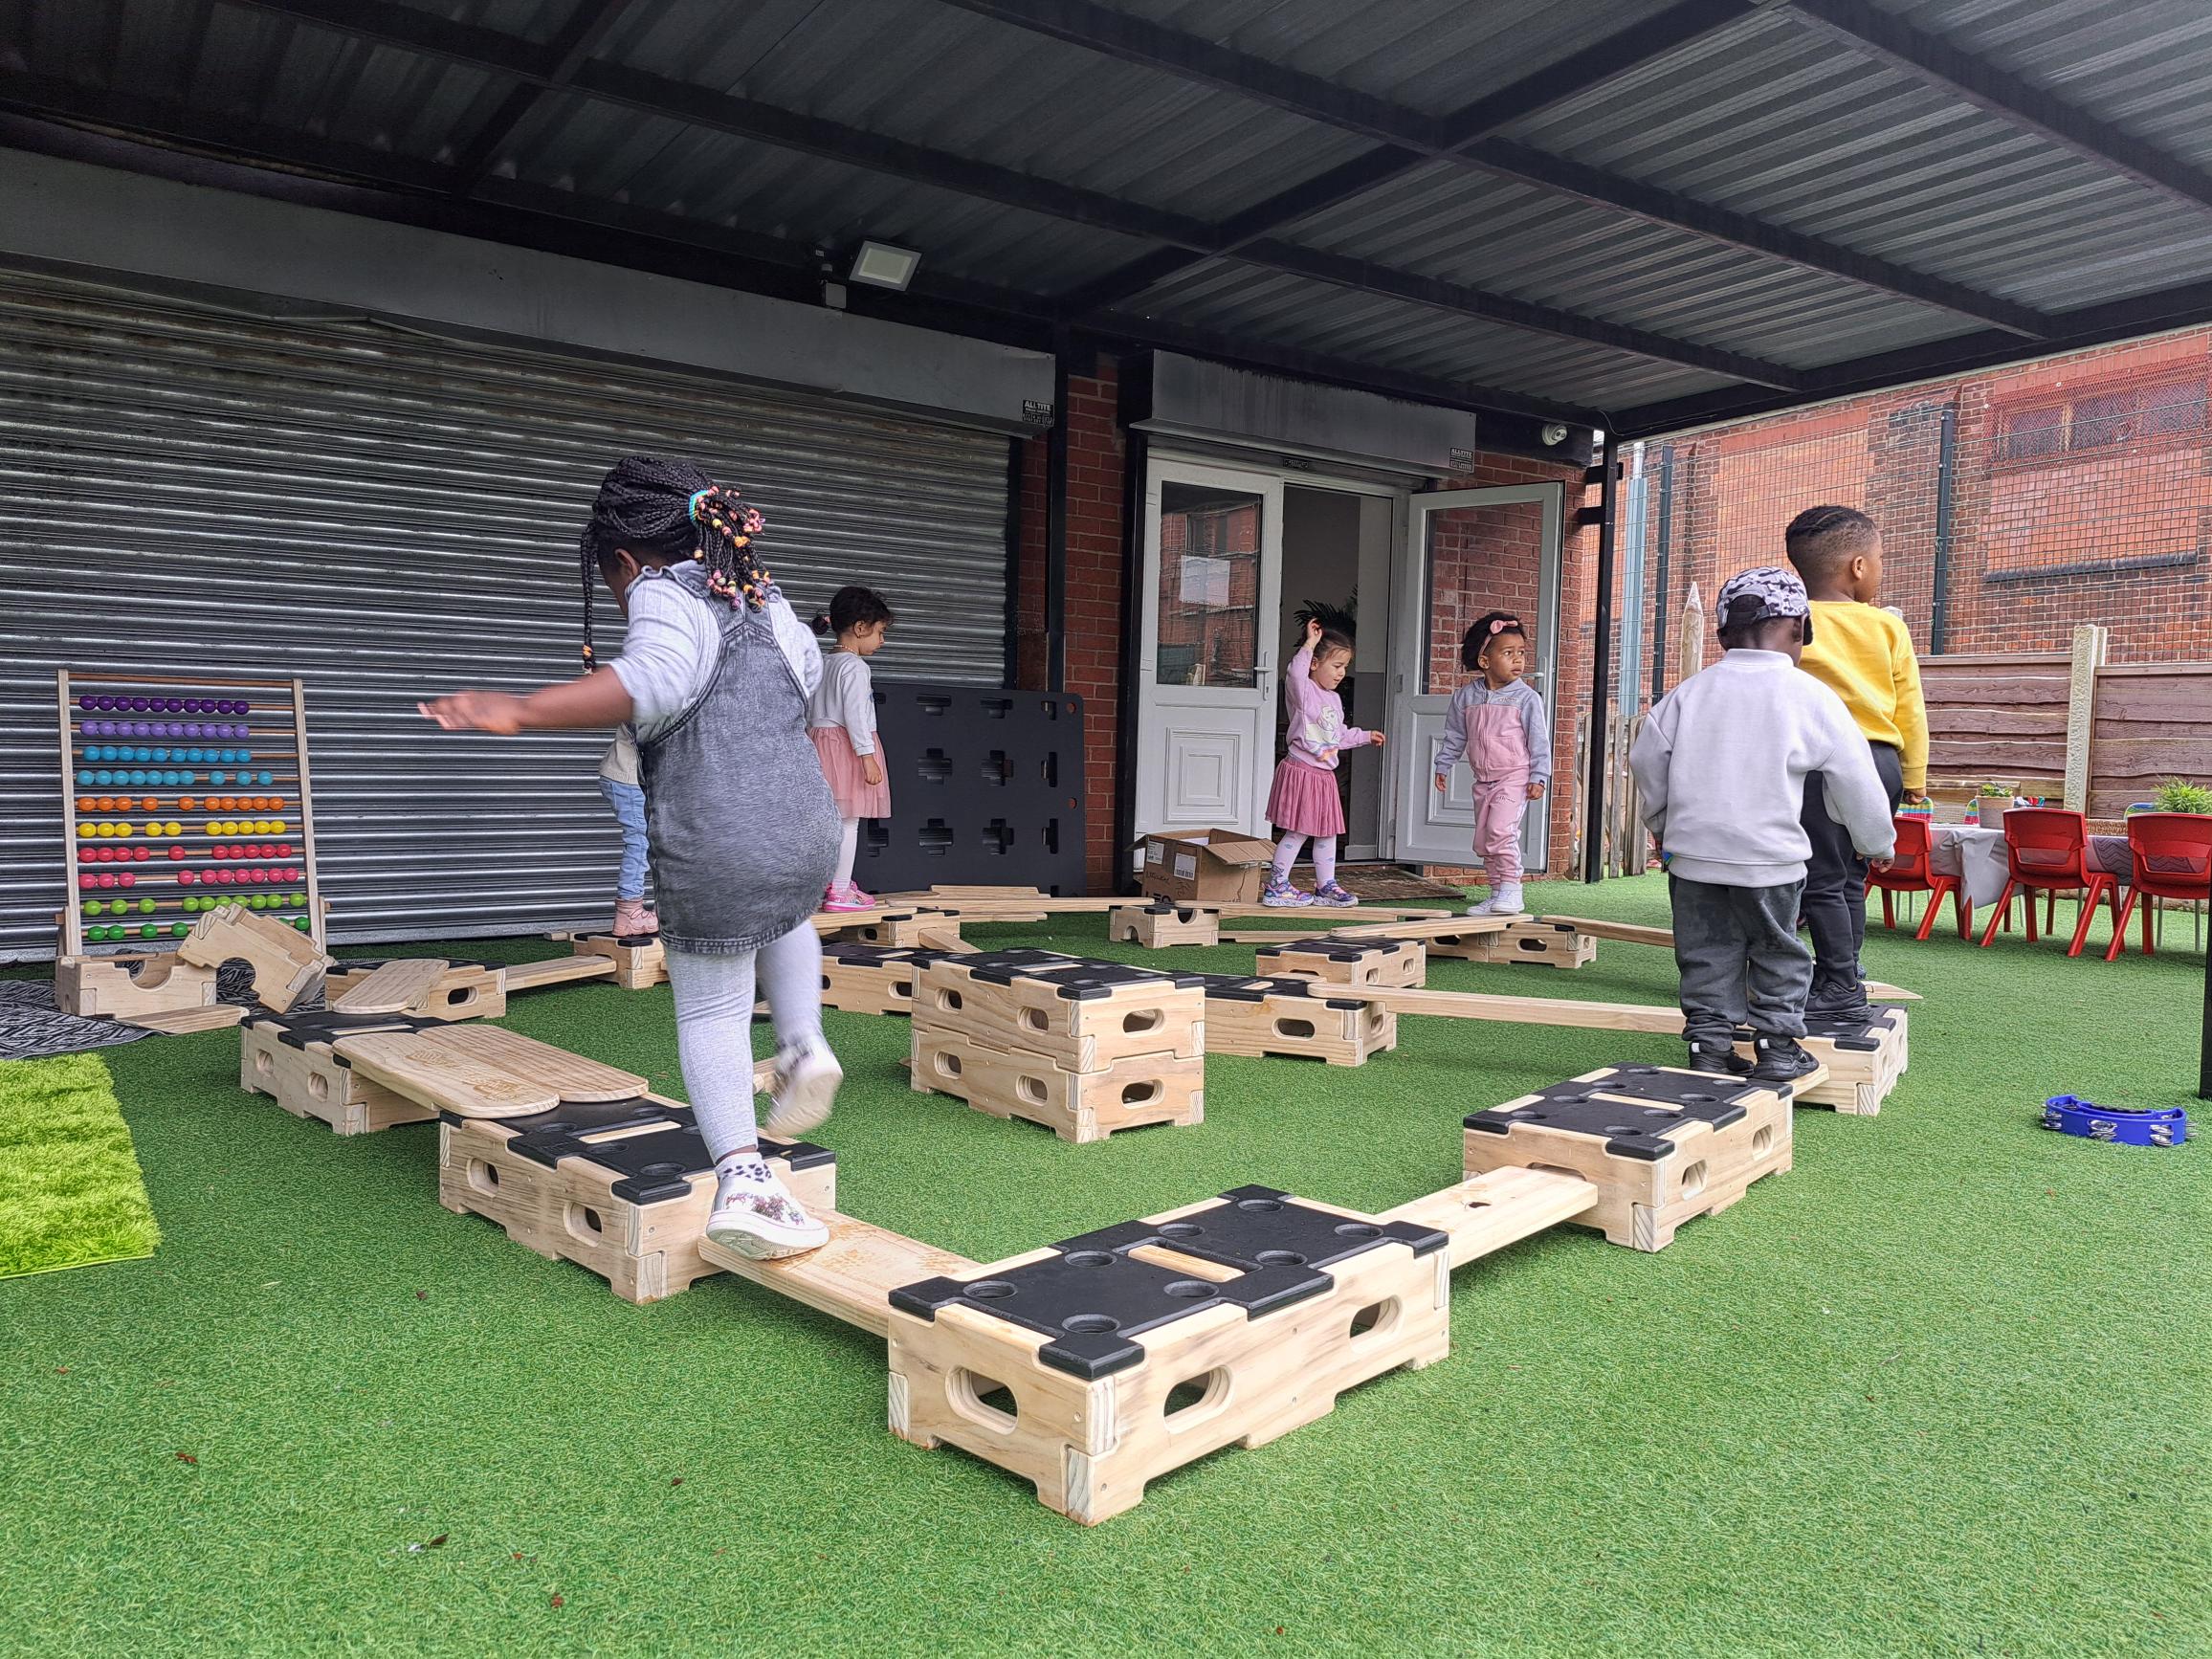 A group of children are balancing and standing on wooden planks and blocks that are included in the Play Builder set. They have created a circuit as the planks and blocks connect to each other.